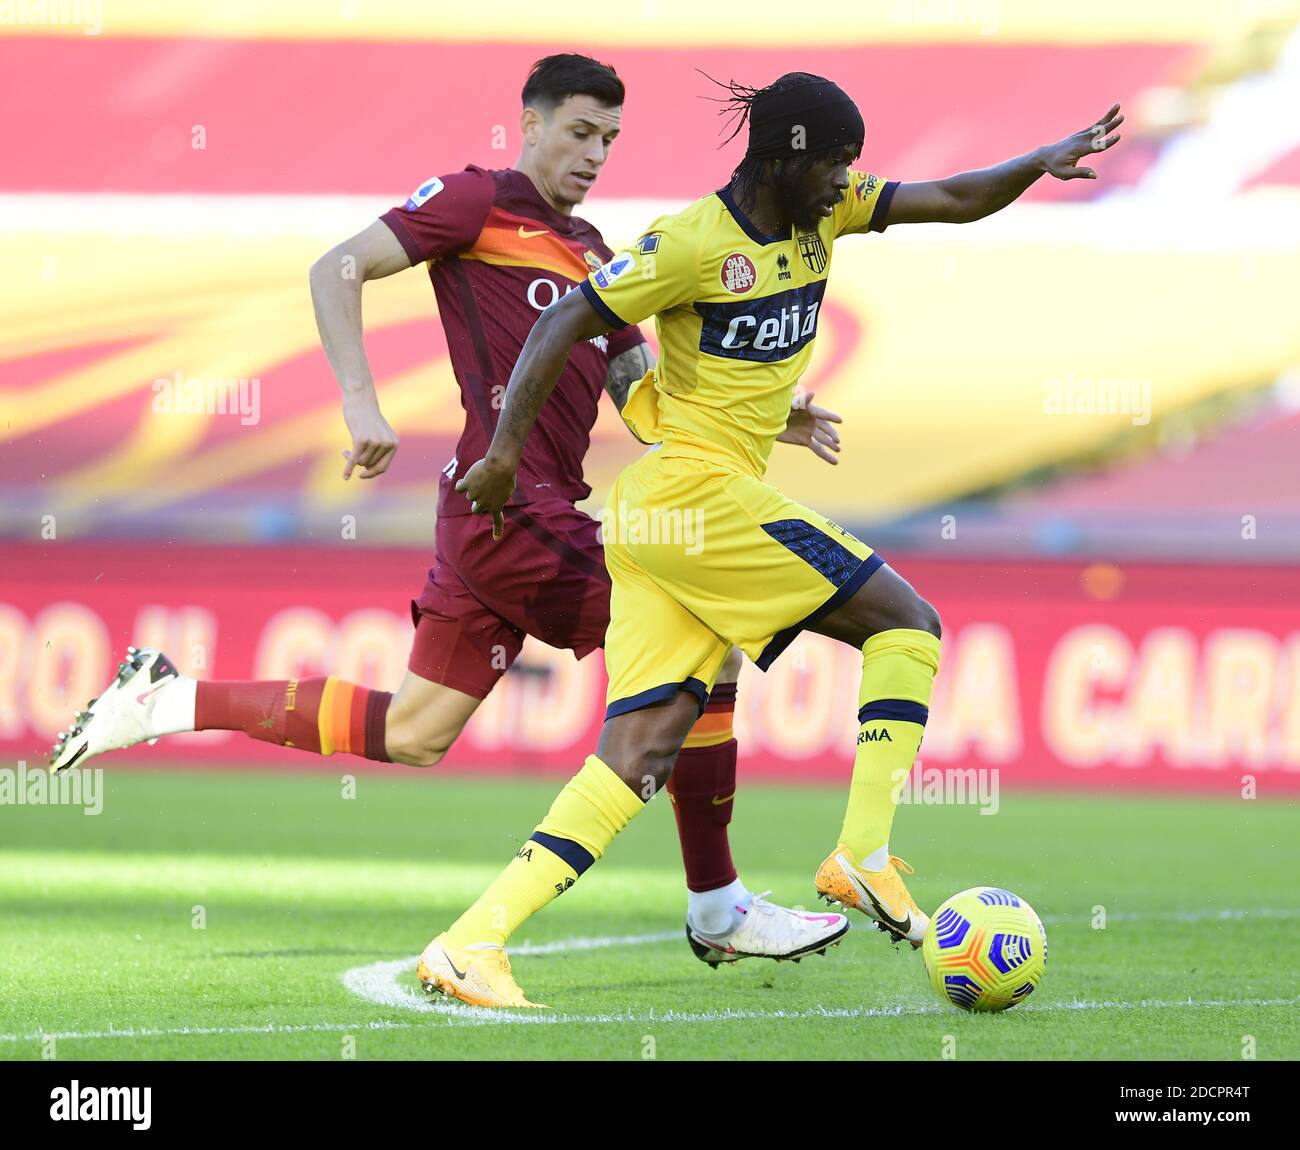 Rome, Italy. 22nd Nov, 2020. Roma's Roger Ibanez (L) defends Parma's Gervinho during a Serie A football match between Roma and Parma in Rome, Italy, Nov. 22, 2020. Credit: Augusto Casasoli/Xinhua/Alamy Live News Stock Photo